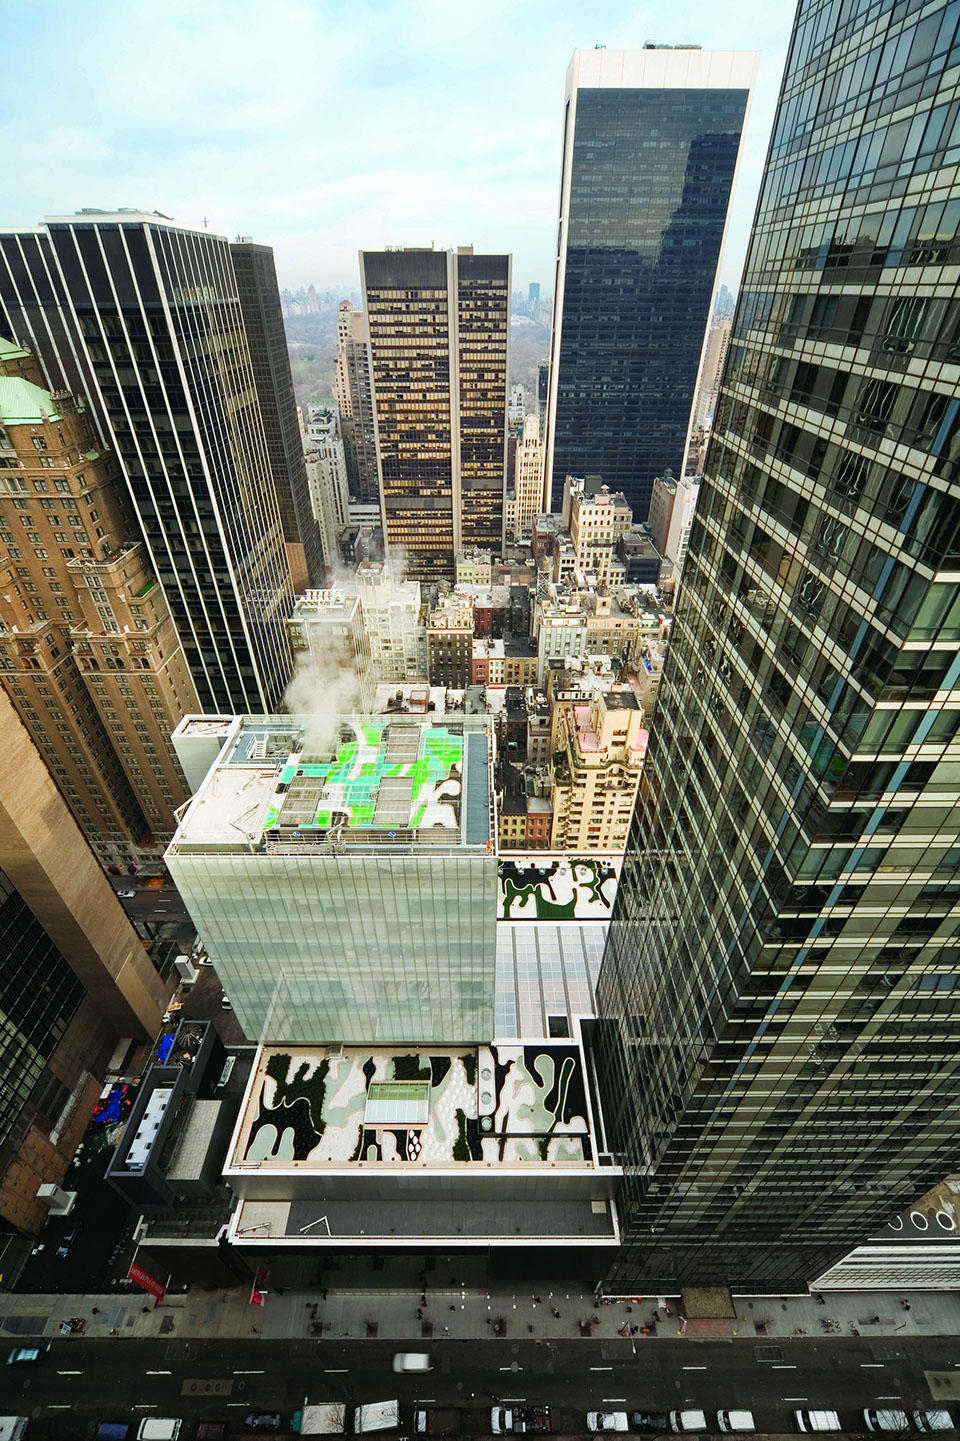 Moma Roof